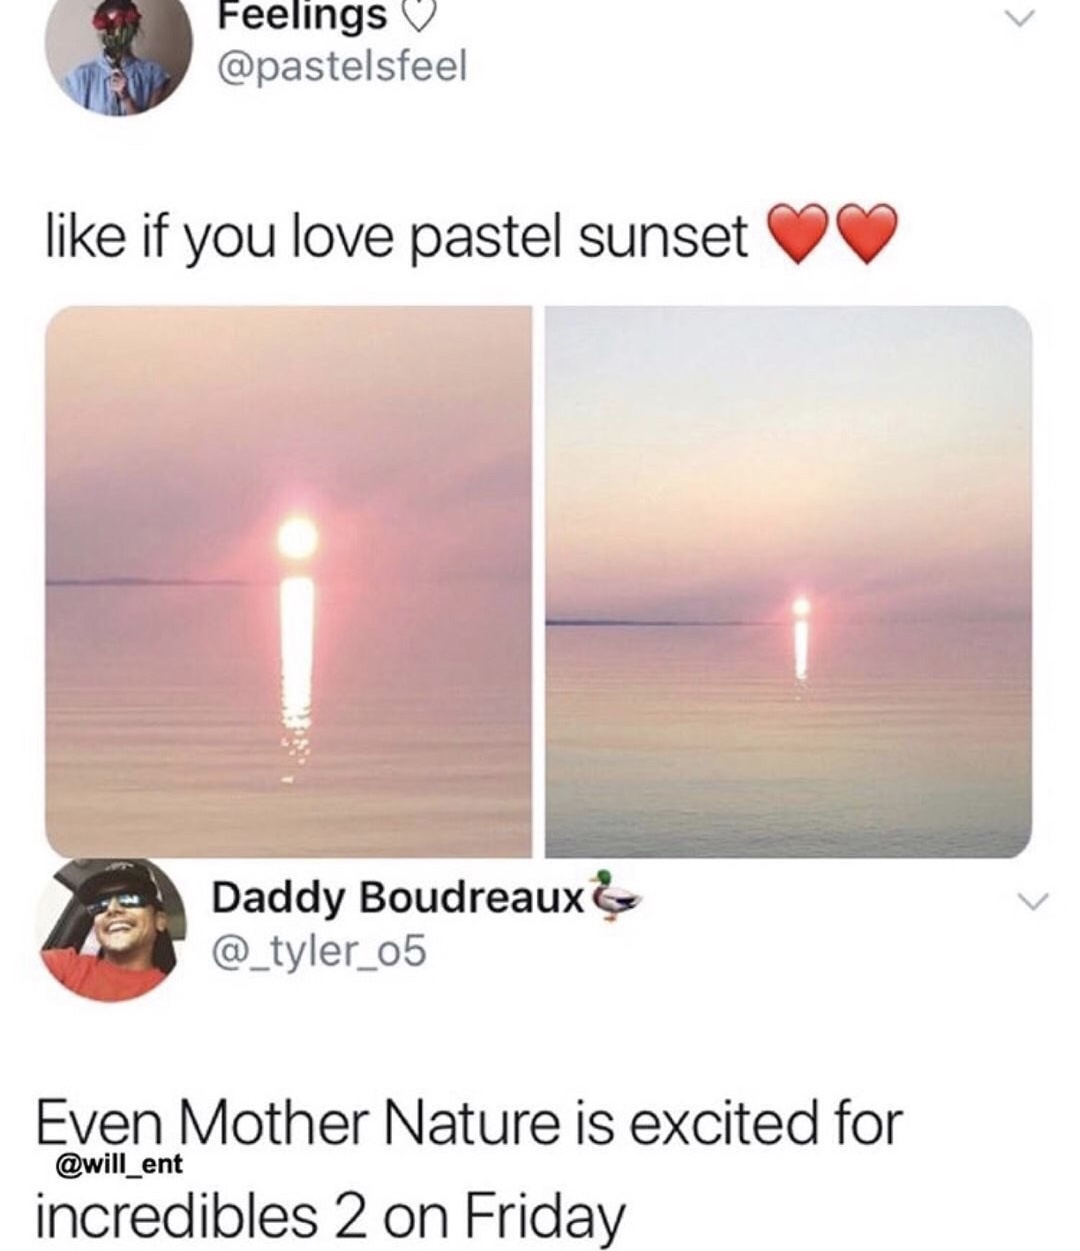 heat - Feelings v if you love pastel sunset Daddy Boudreaux & Even Mother Nature is excited for incredibles 2 on Friday